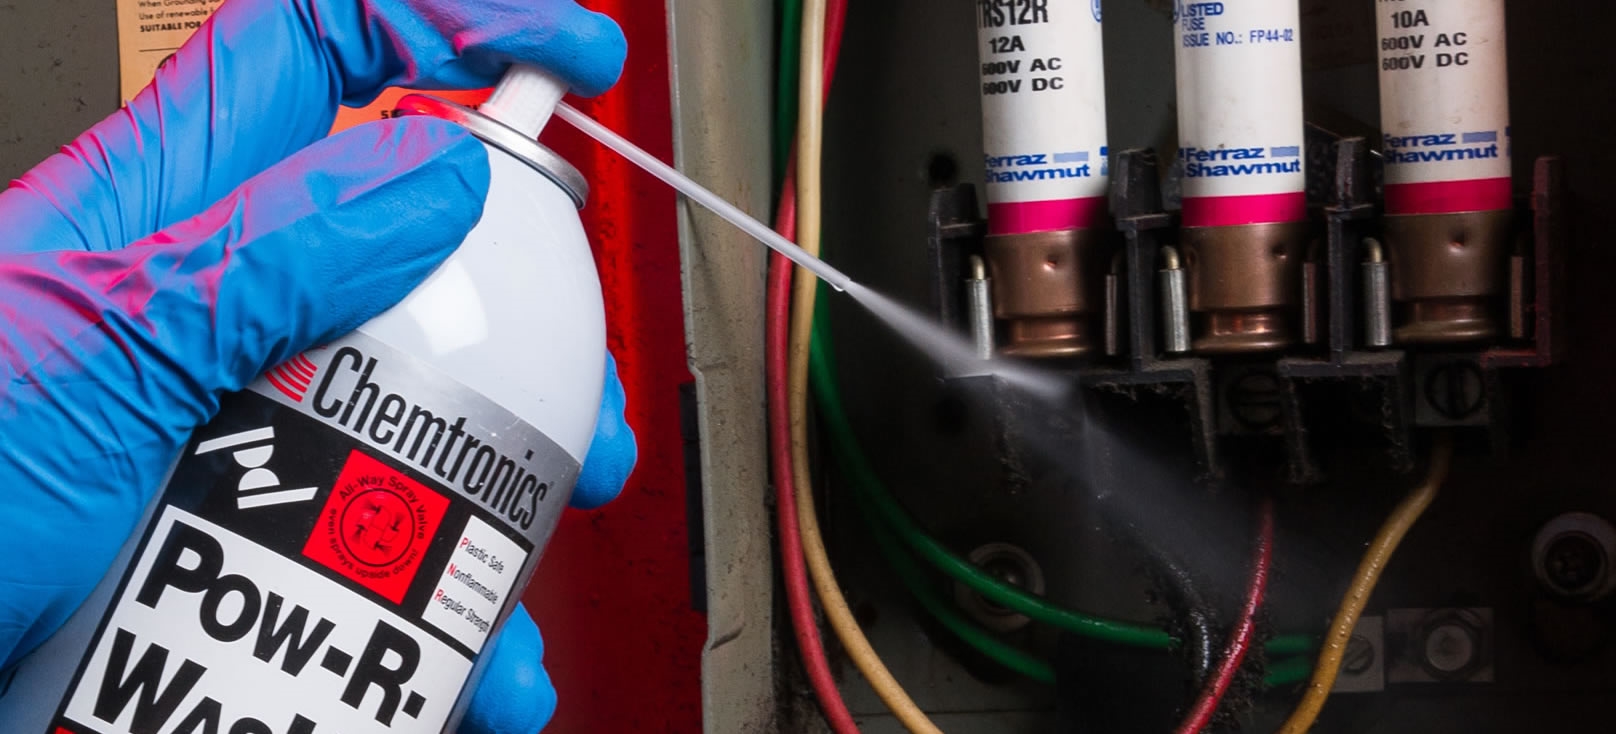 Can brake cleaner or carb cleaner be used to clean electrical contacts? - Banner